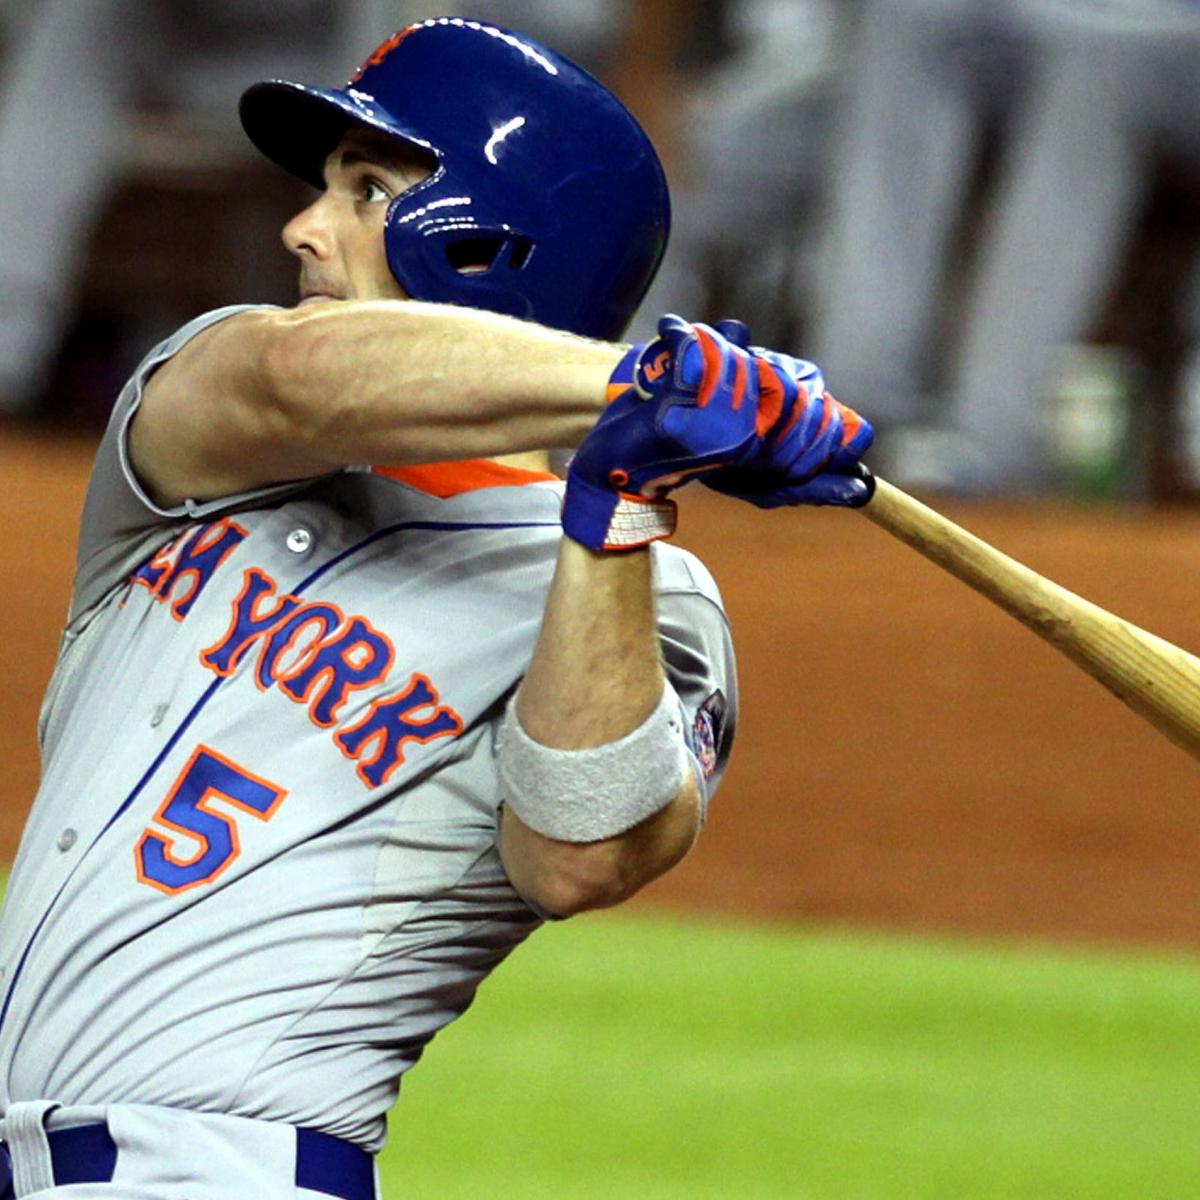 Travis d'Arnaud gives up his No. 7 to Jose Reyes, Mets catcher